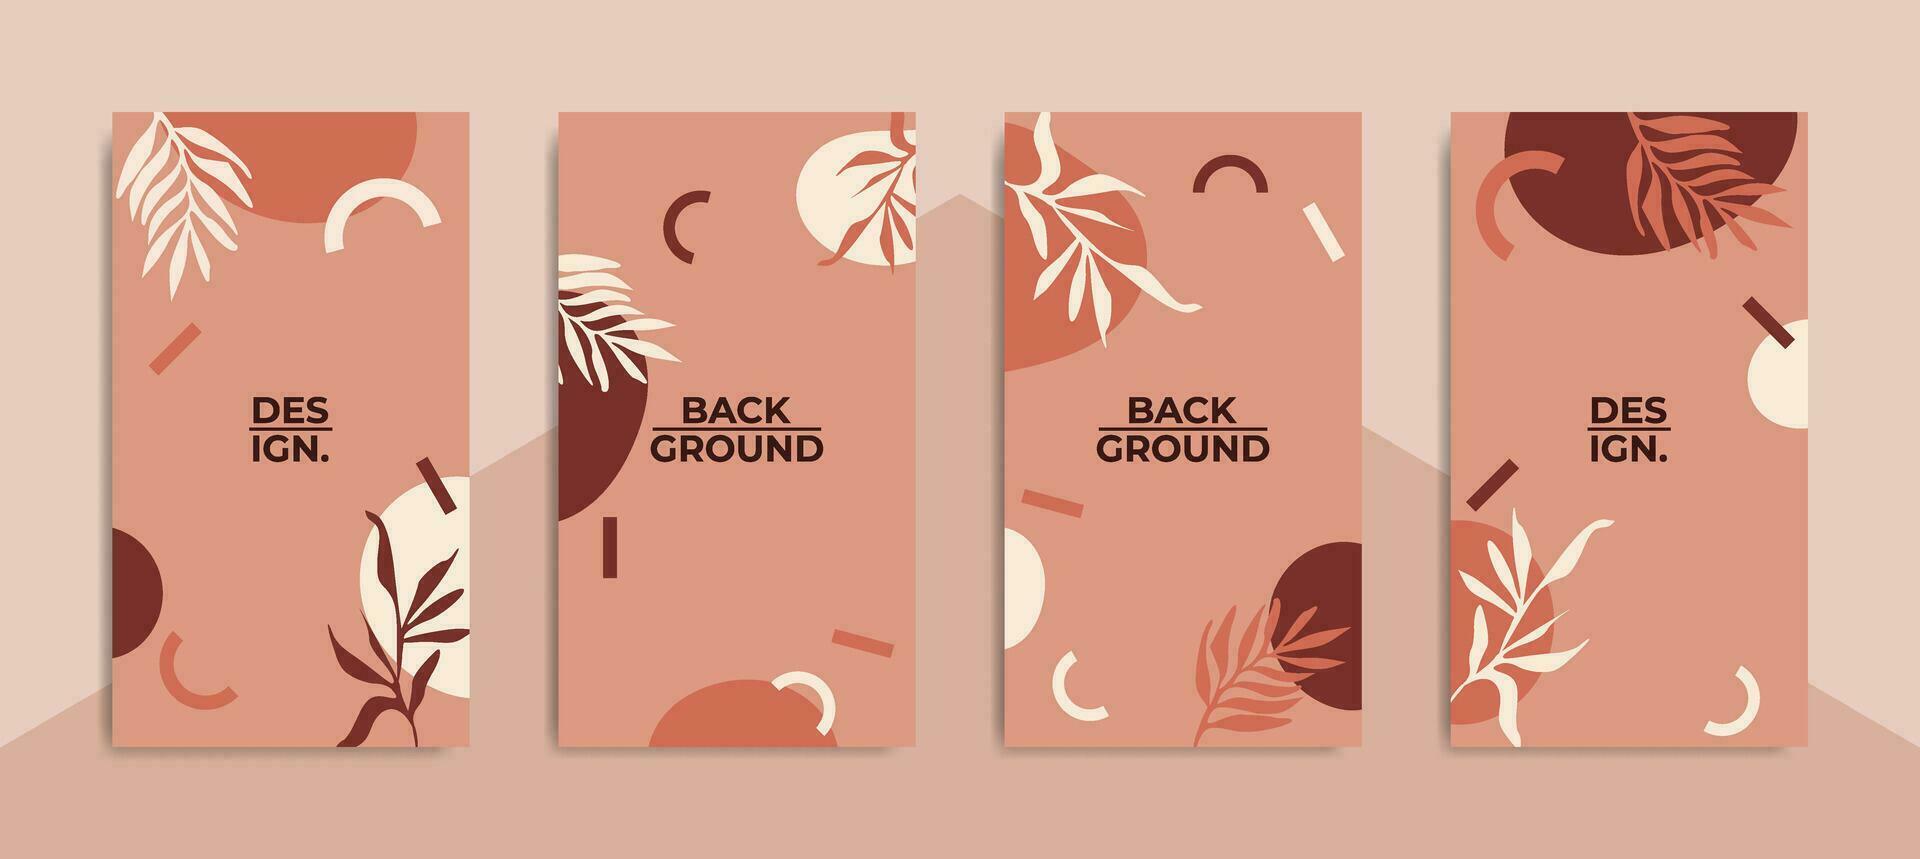 Editable Trendy background template. perfect for social media stories, ads, posters, banners, etc vector